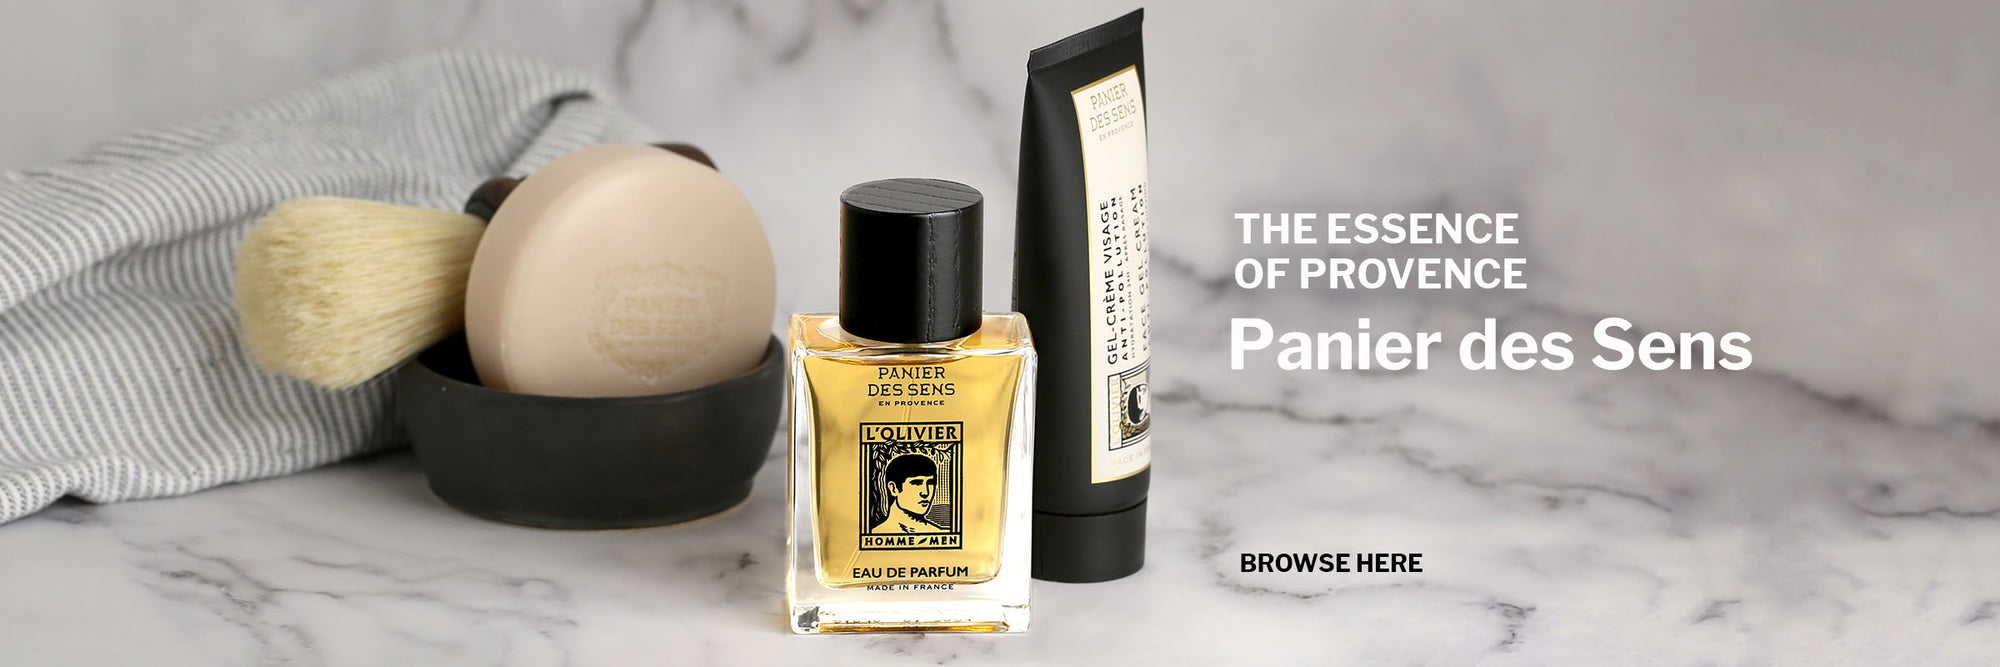 Shavibg soap and brush with black terracotta bowl, Eau de Parfum bottle in centre, and Face Gel Cream on a white and grey marble background with grey and white striped face cloth